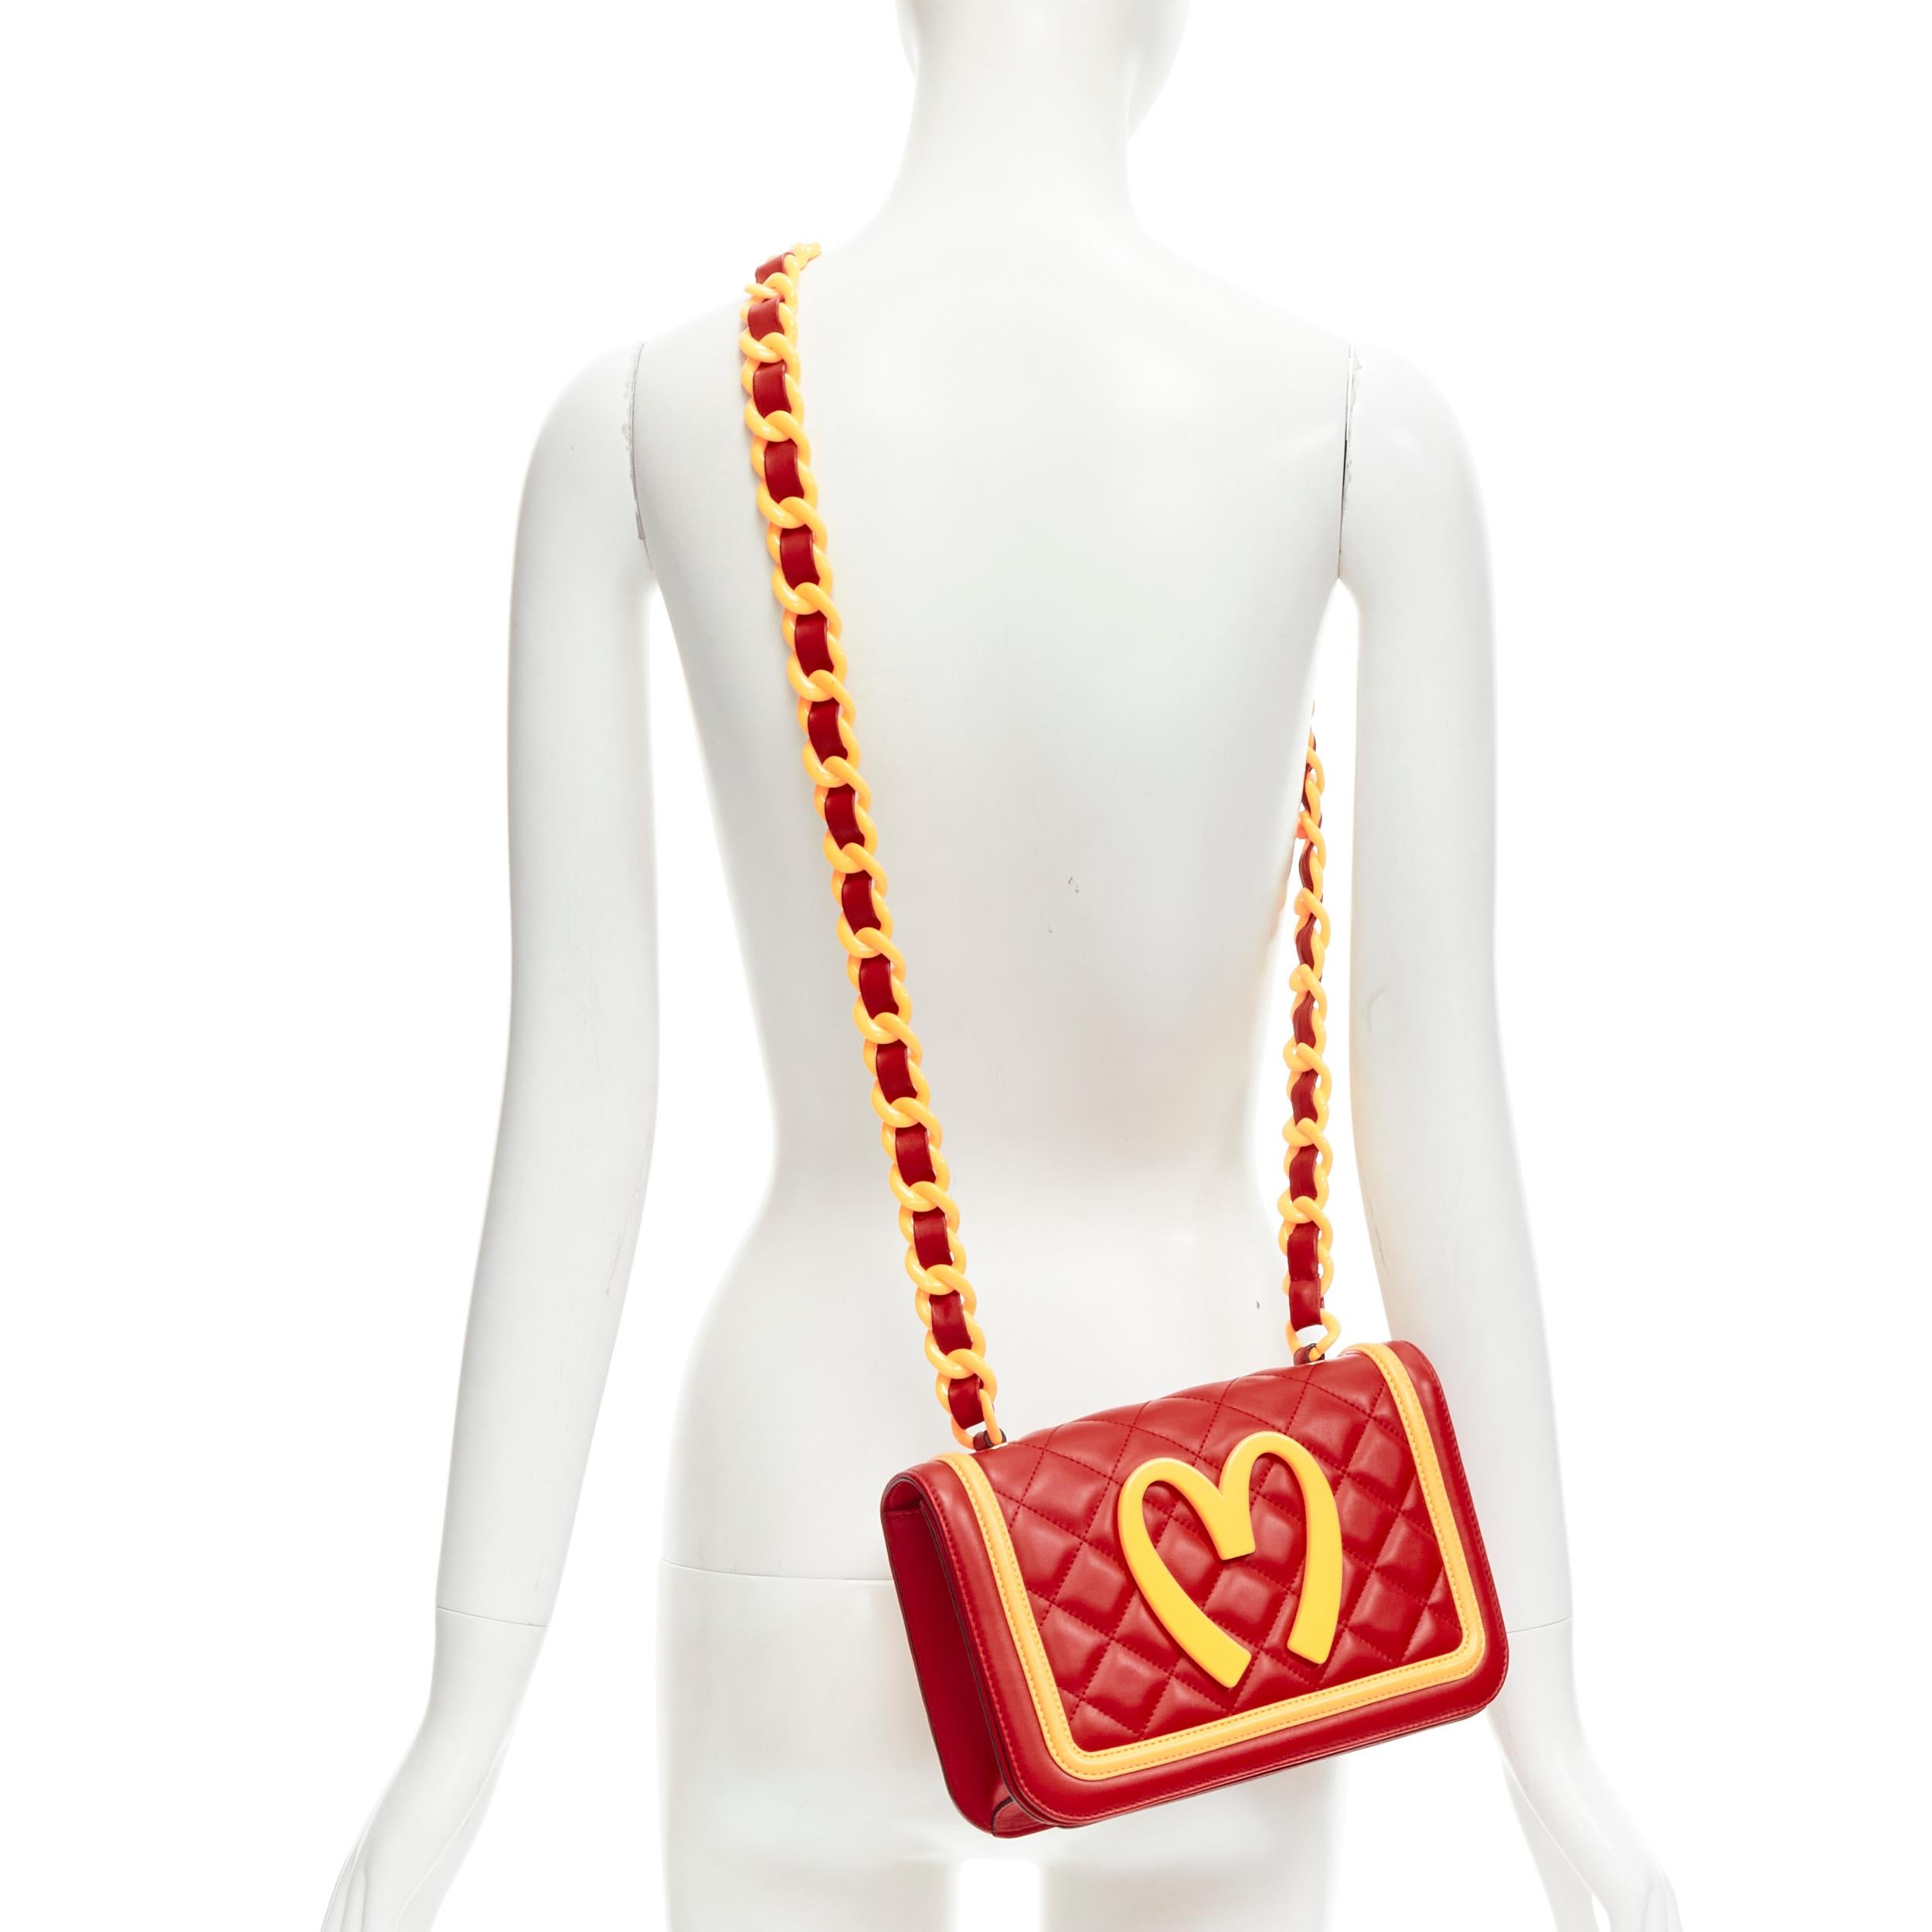 MOSCHINO 2014 Runway Mcdonalds Fast Food red yellow quilted crossbody flap bag
Brand: Moschino
Designer: Jeremy Scott
Collection: AW2014 Runway
Material: Leather
Color: Red
Pattern: Solid
Closure: Magnet
Extra Detail: Diamond quilted leather with